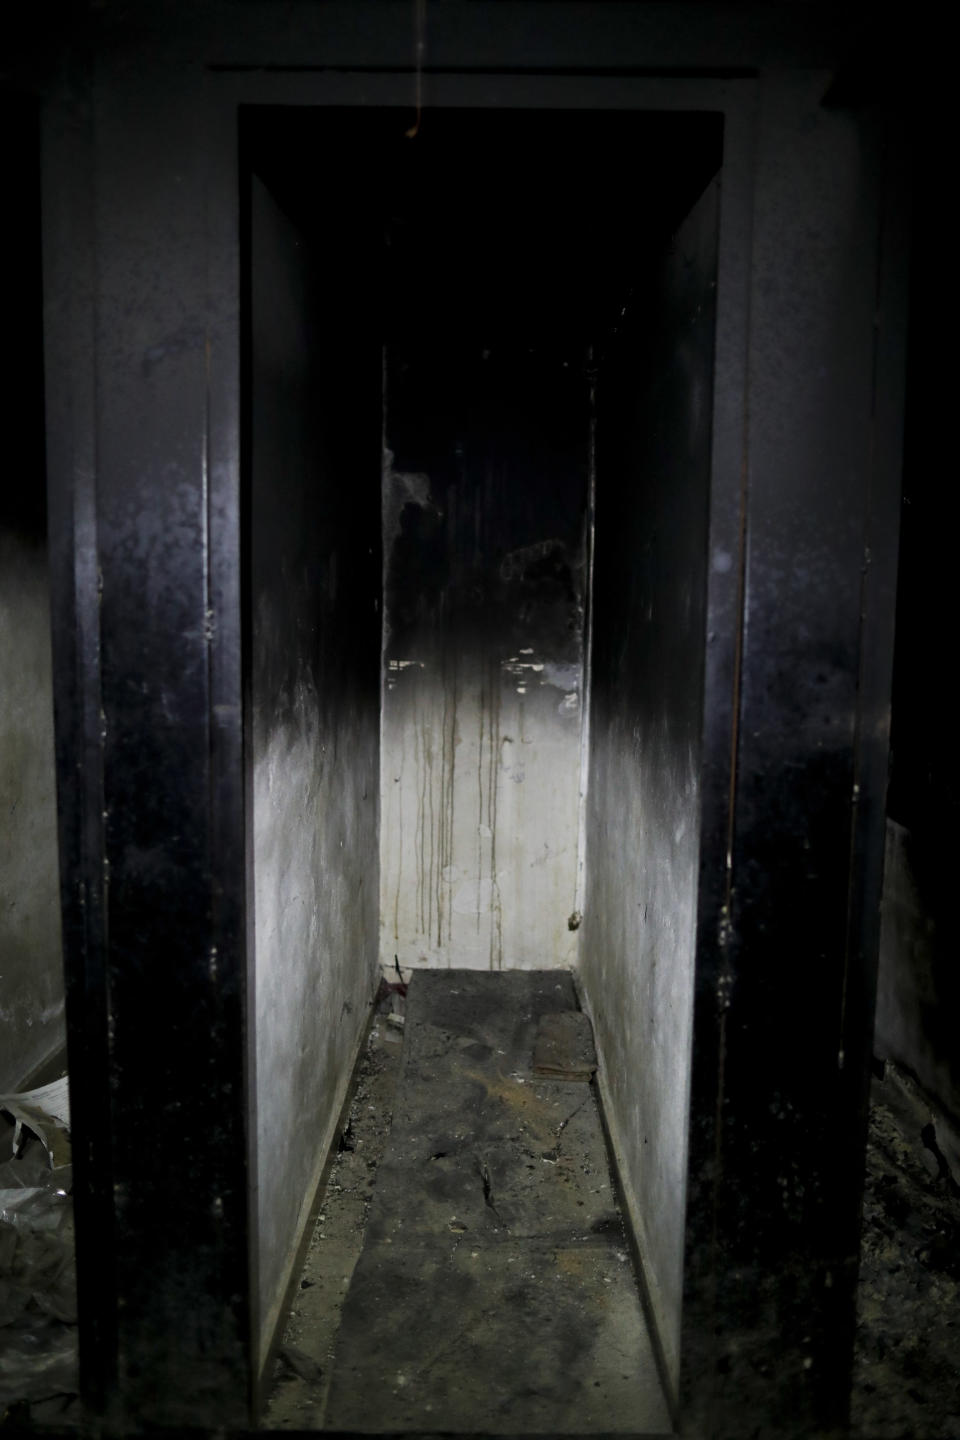 In this July 15, 2018 photo, a burned underground prison cell is abandoned in Tawbeh Prison, where over the years the Army of Islam detained hundreds of people, in Douma, near the Syrian capital Damascus, Syria. The fate of activist Razan Zaitouneh is one of the longest-running mysteries of Syria’s civil war. There’s been no sign of life, no proof of death since gunmen abducted her and three of her colleagues from her offices in the rebel-held town of Douma in 2013. Now Douma is in government hands and clues have emerged that may bring answers. (AP Photo/Hassan Ammar)